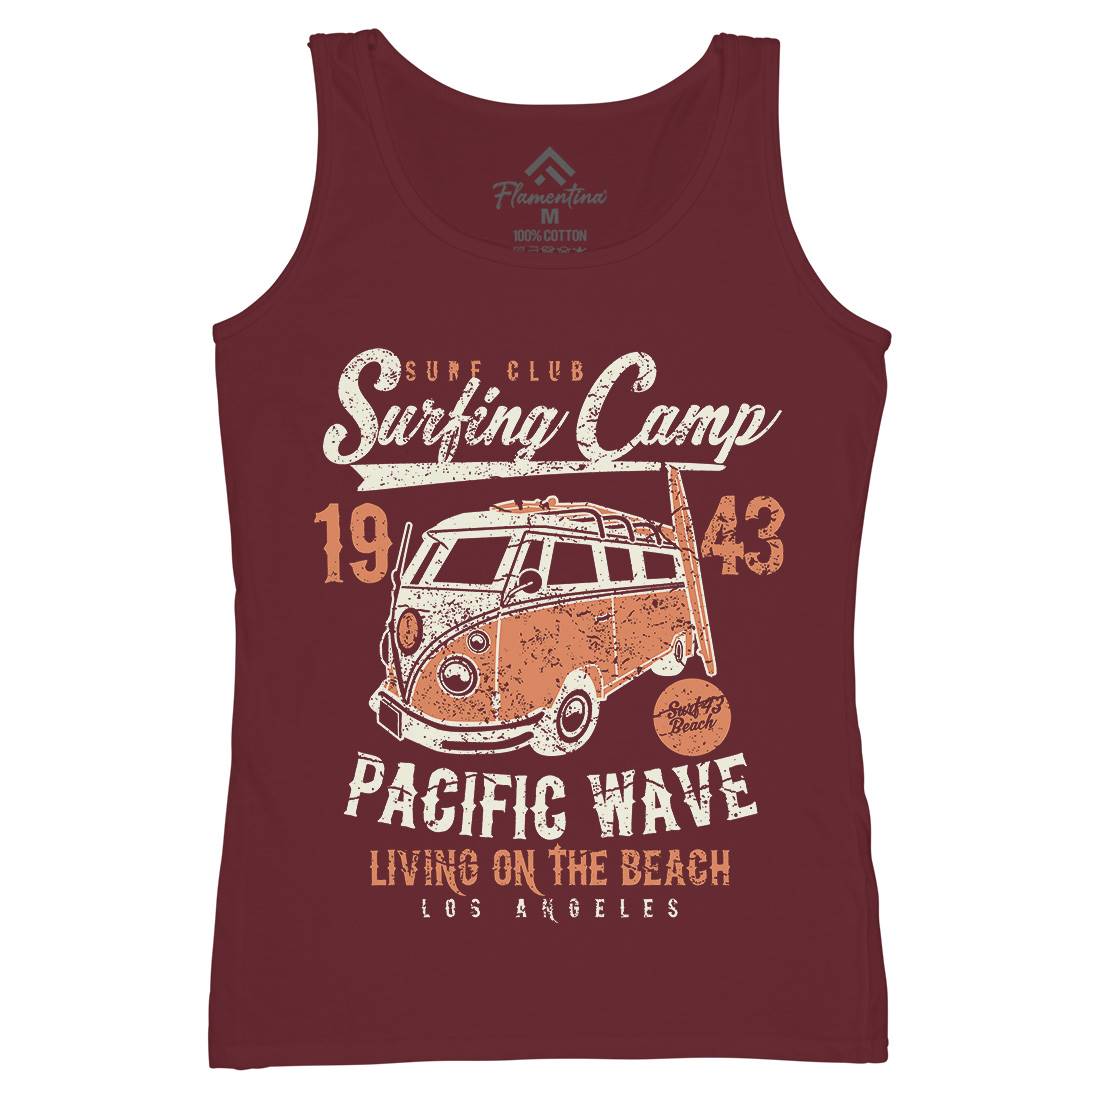 Surfing Camp Womens Organic Tank Top Vest Surf A170